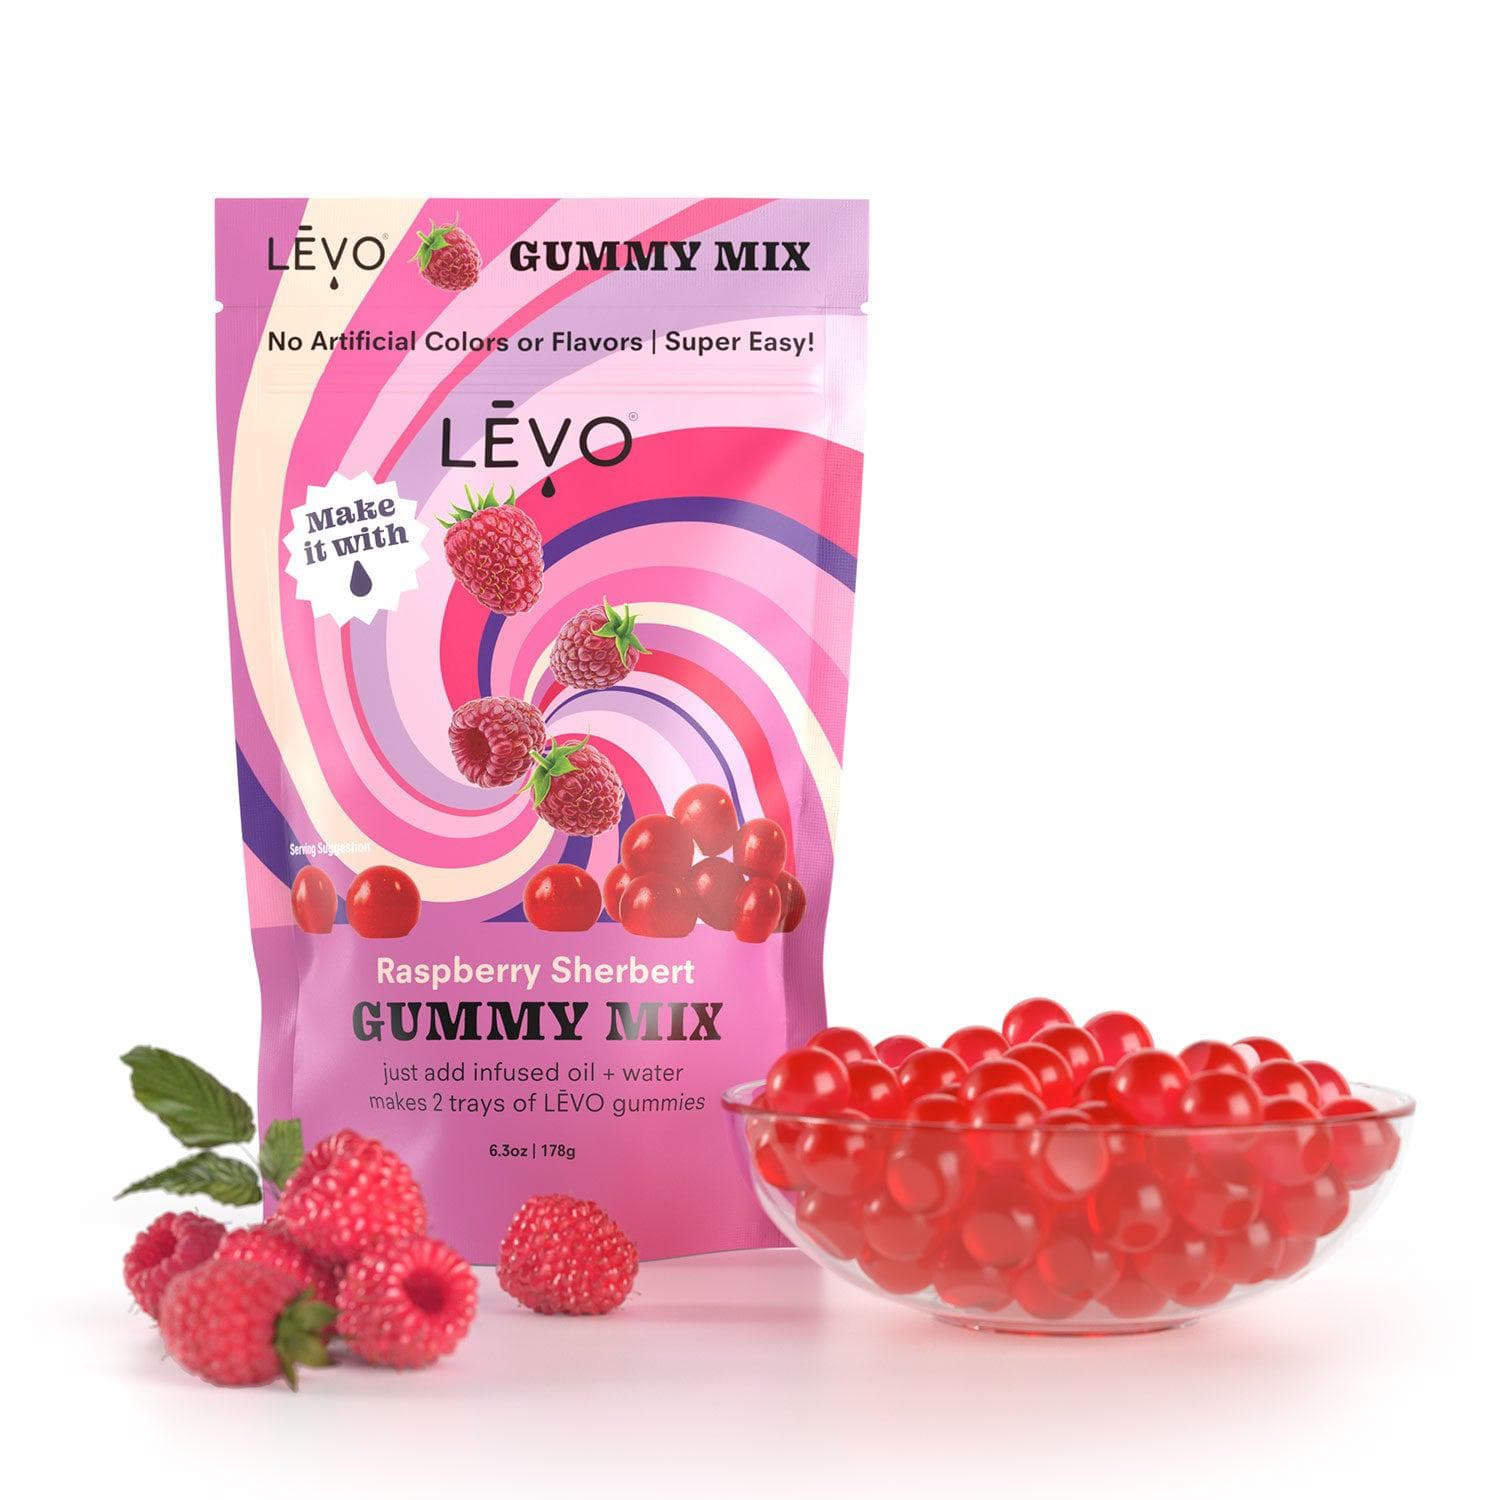 LEVO Gummy mix in raspberry sherbert. Raspberry Sherbert Gummy Mix - Delight your taste buds with the refreshing and fruity taste of raspberries in this LĒVO gummy mix.